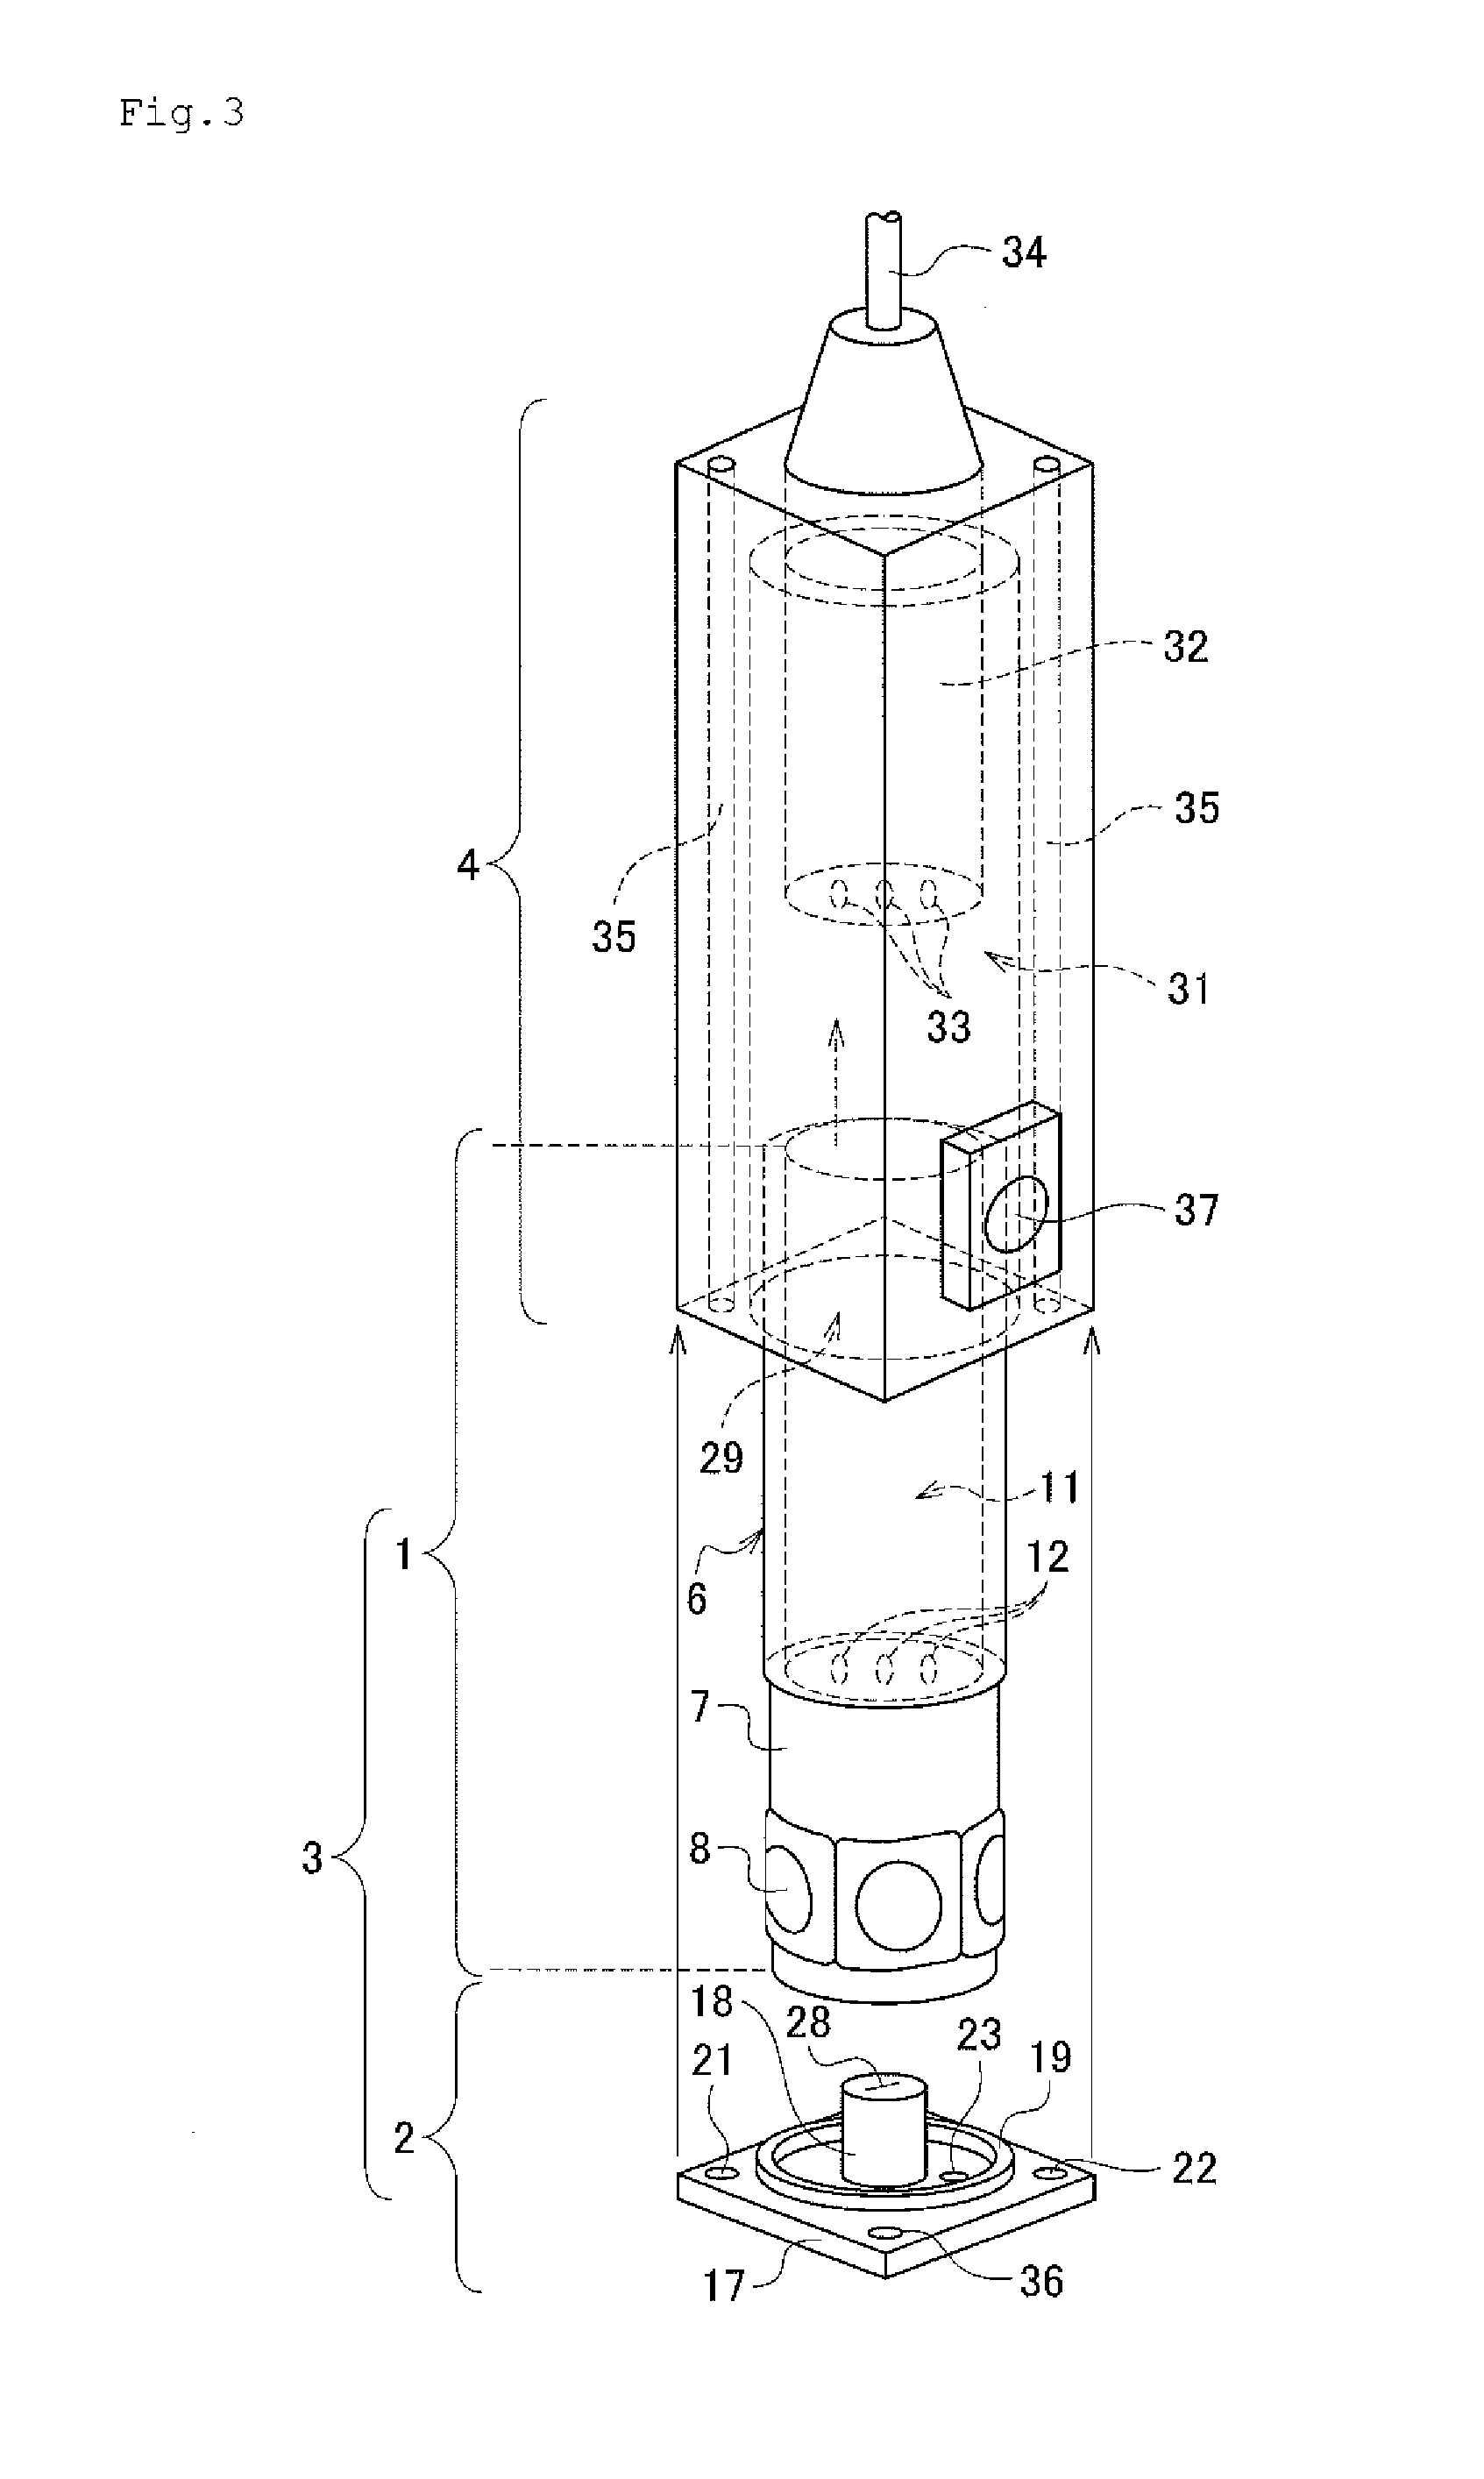 Target for x-ray generator, method of manufacturing the same and x-ray generator